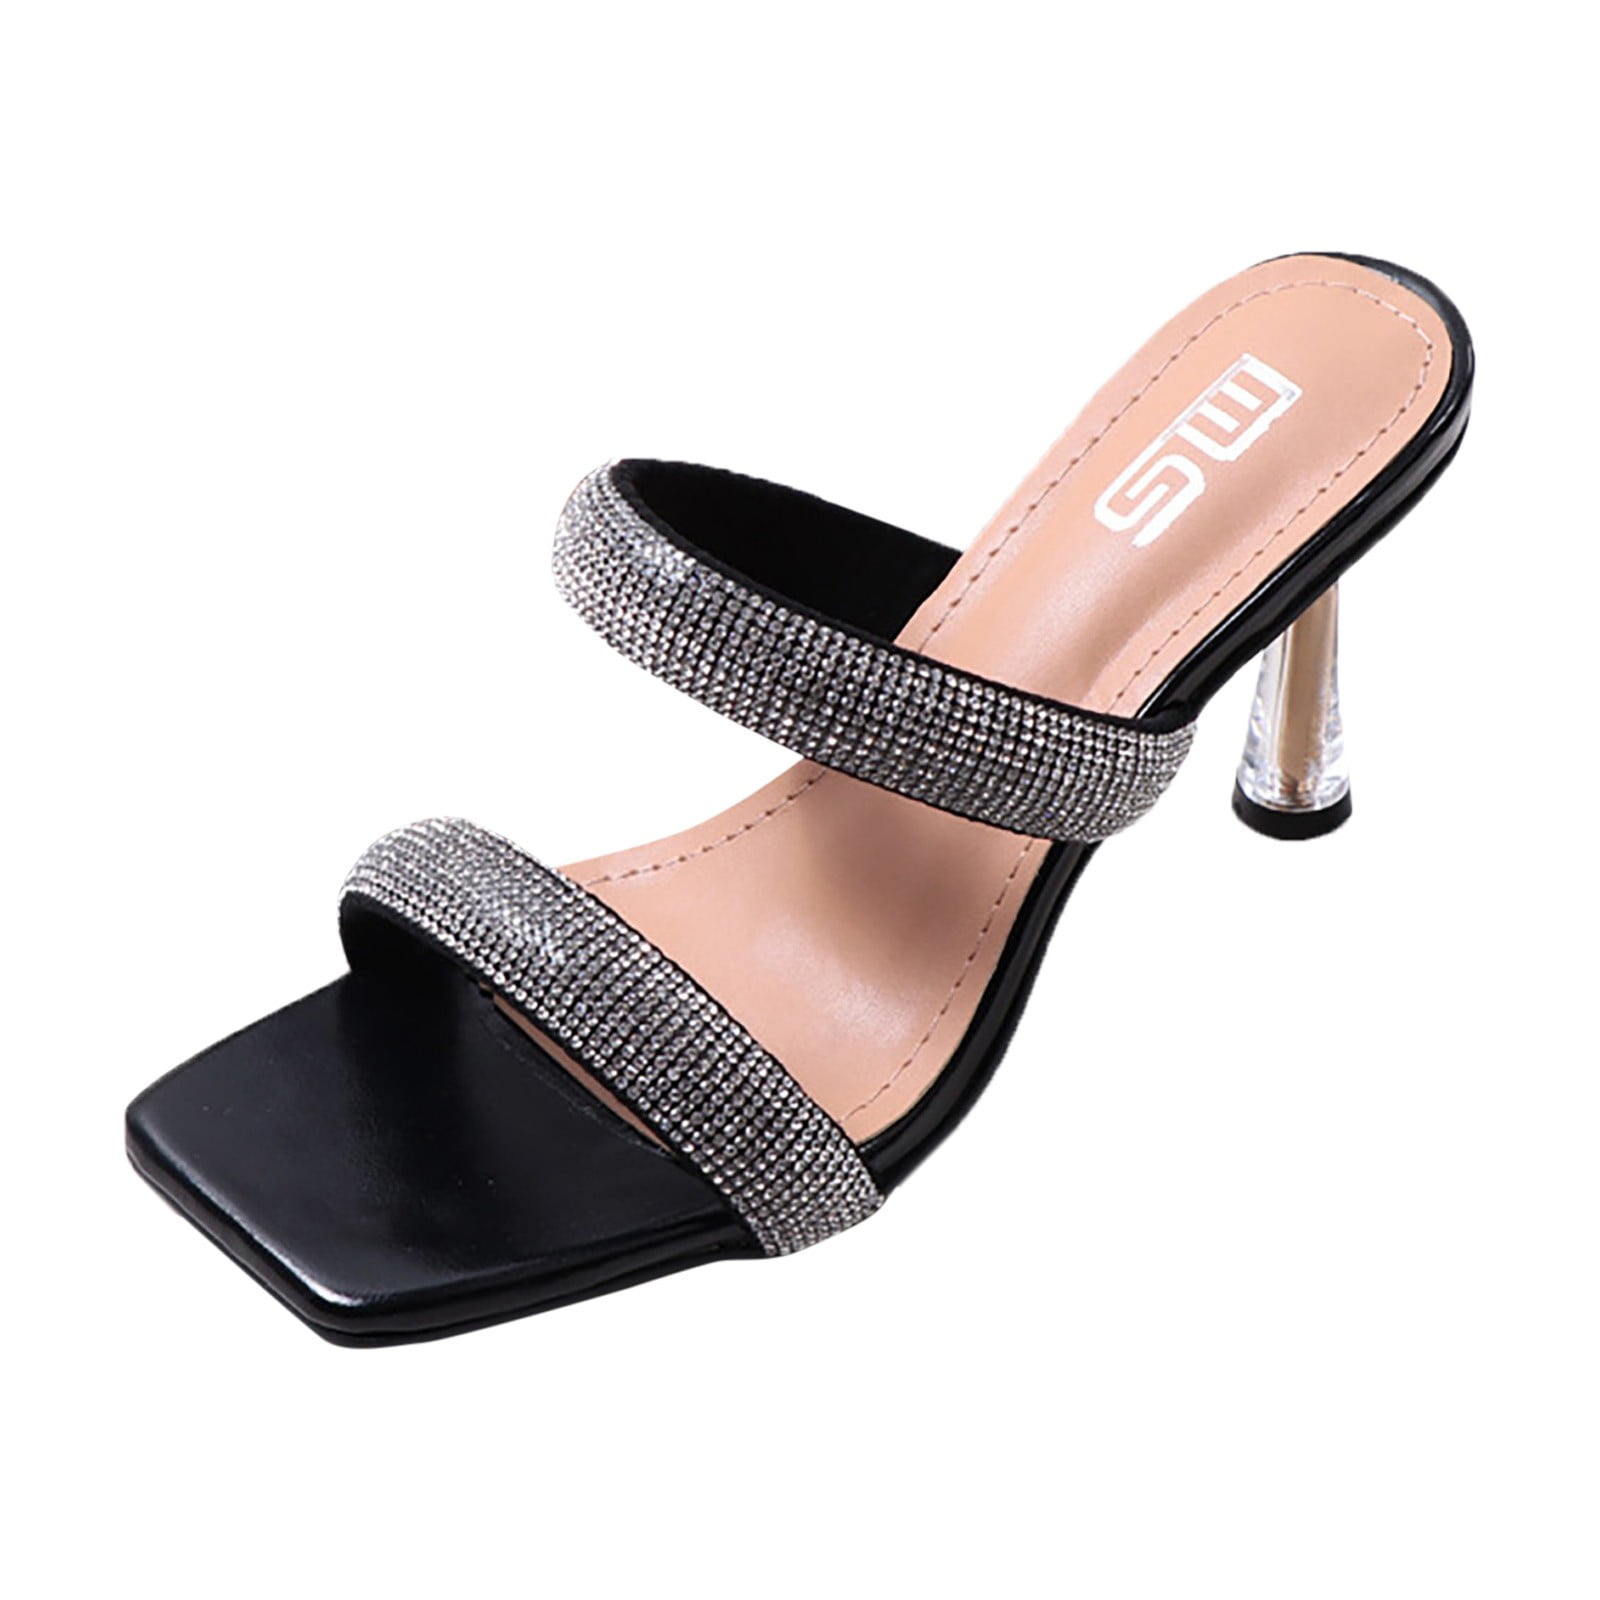  Cathalem my orders Sandals For Women Casual Summer Fashion  Breathable Hollow Out Chunky Heel Sandals With Buckle Strap